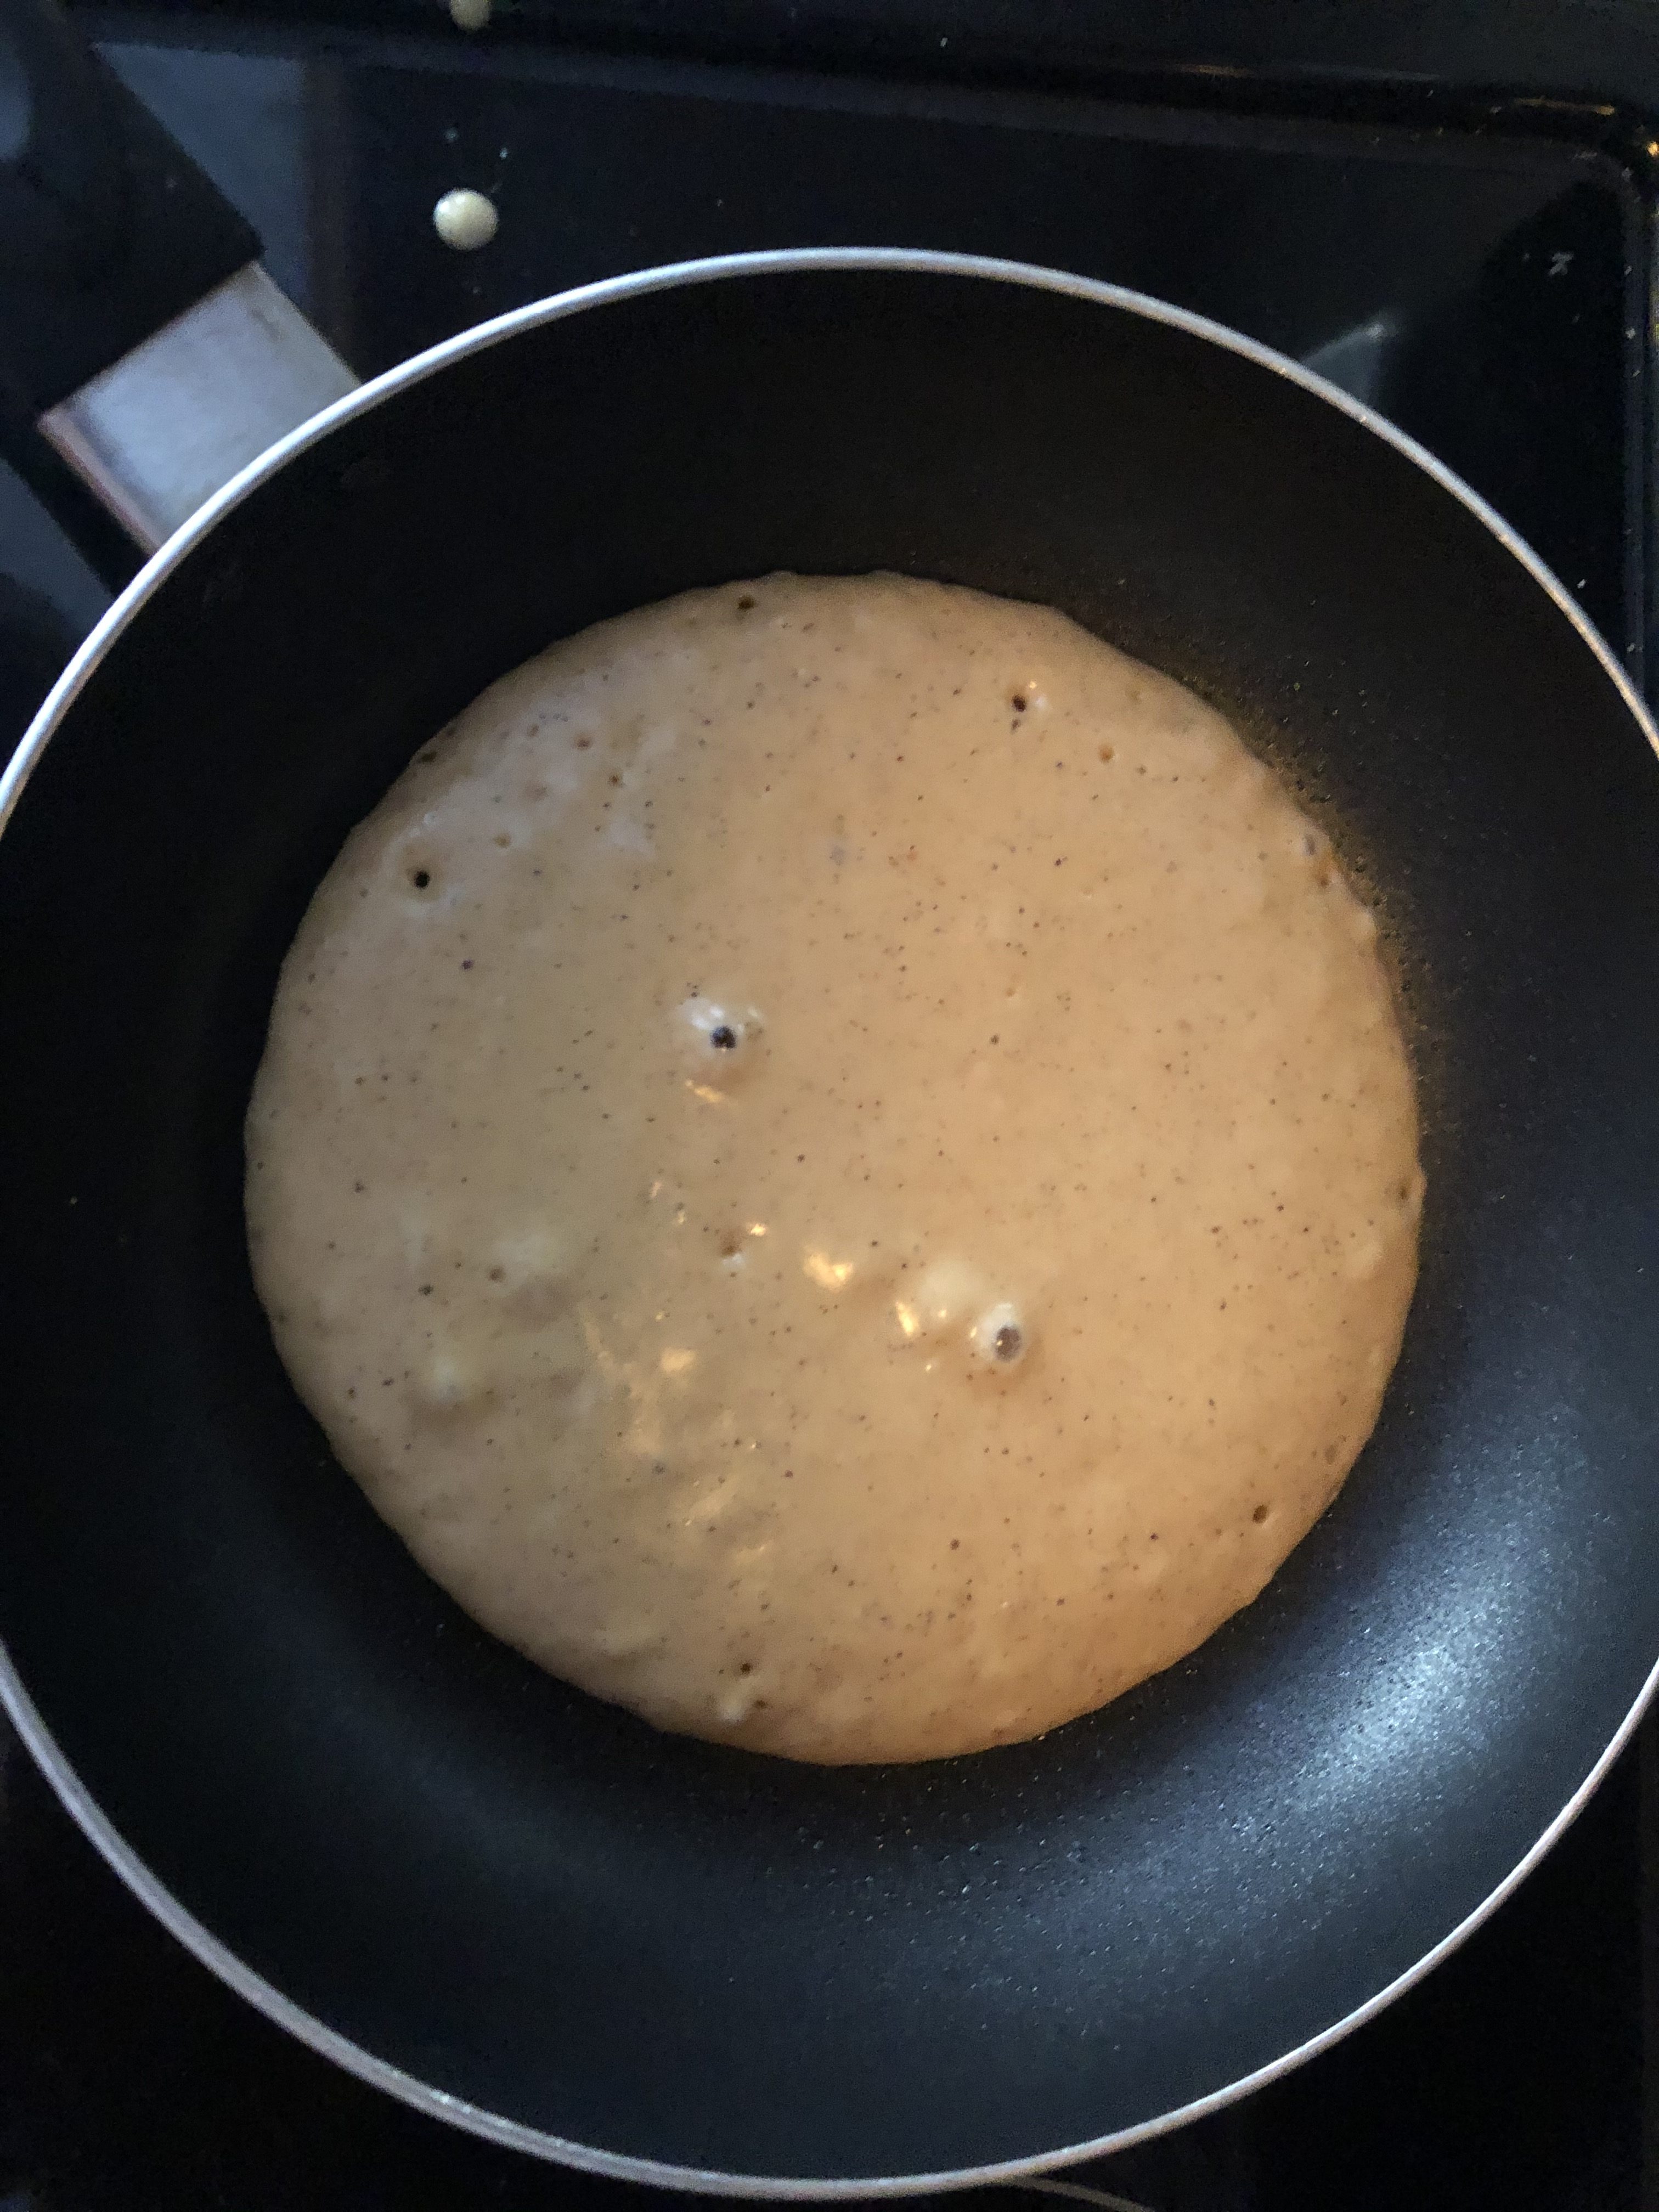 When bubbles appear on surface, then flip and cook on other side until lightly brown.